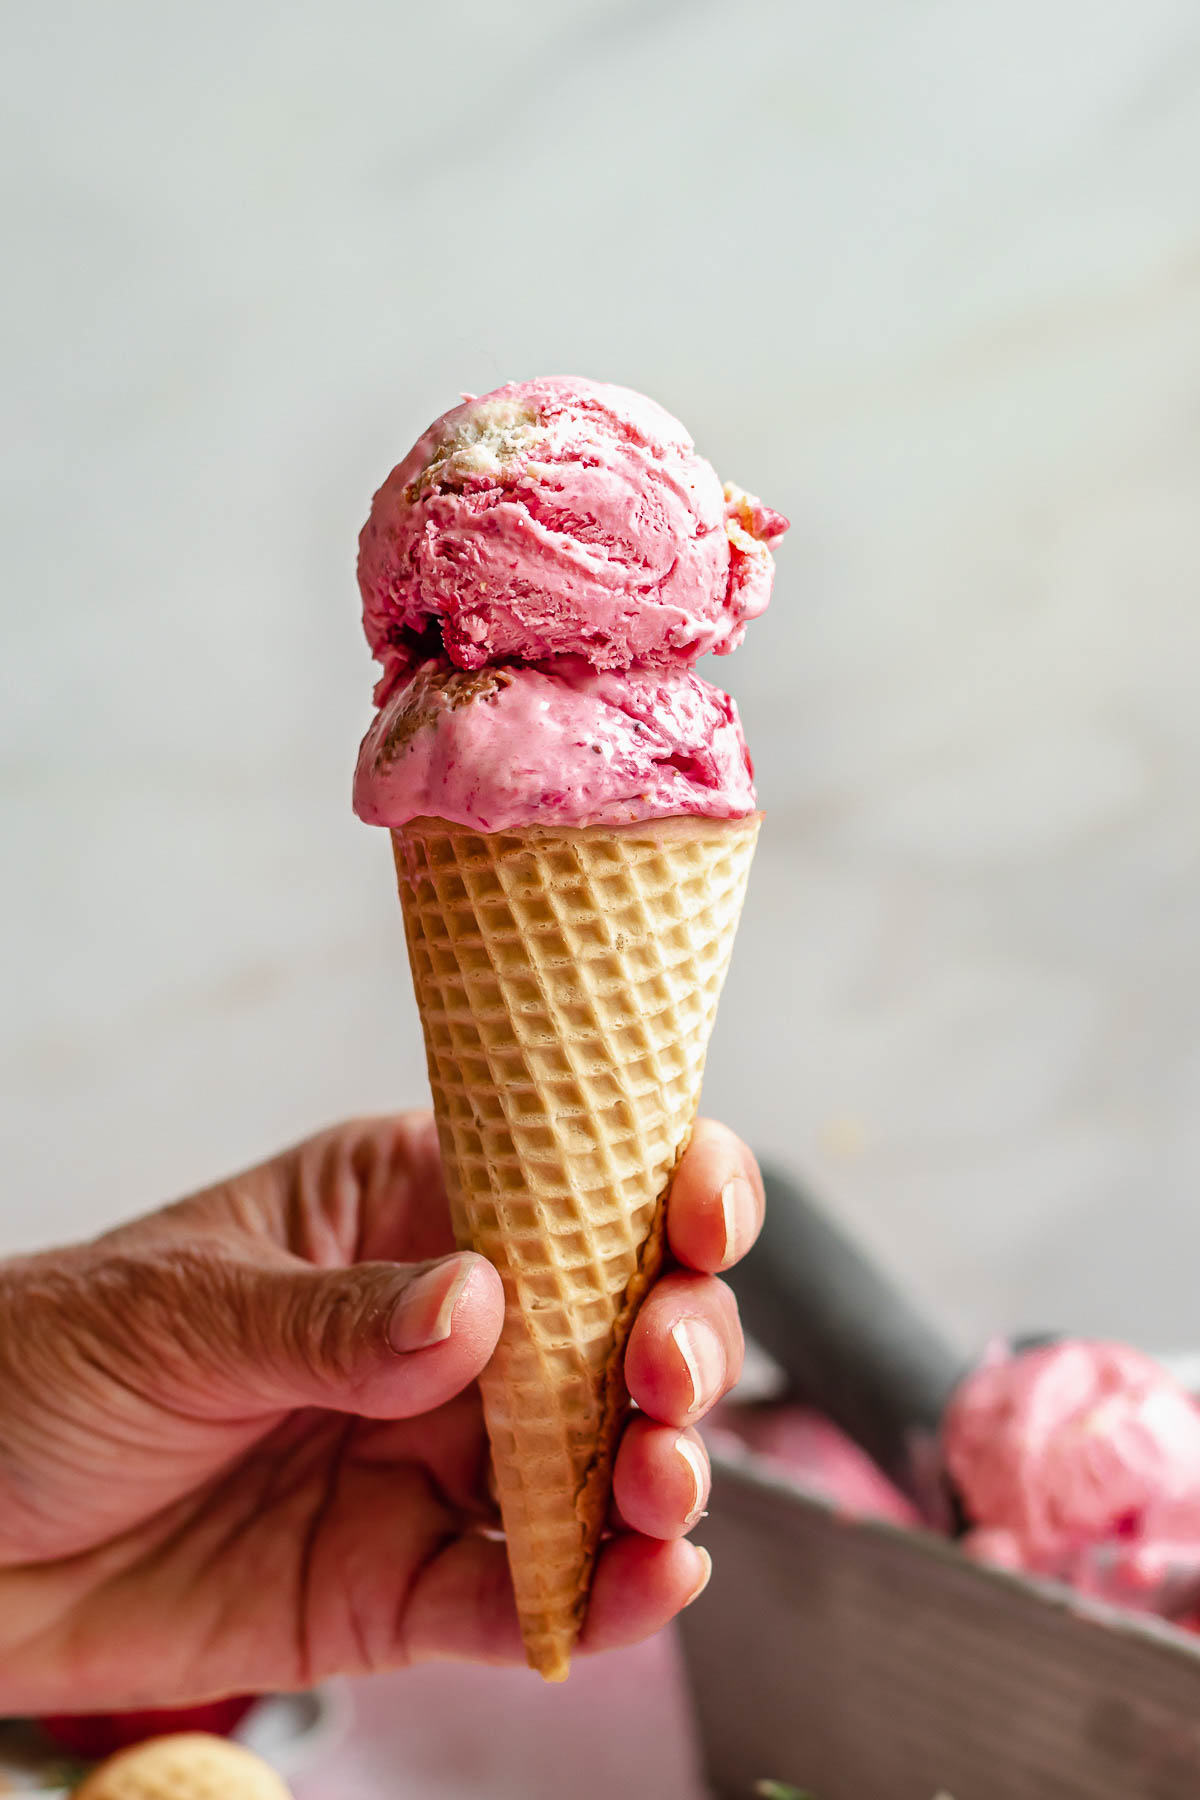 A hand holds an ice cream cone with two scoops of strawberry cheesecake ice cream in it.